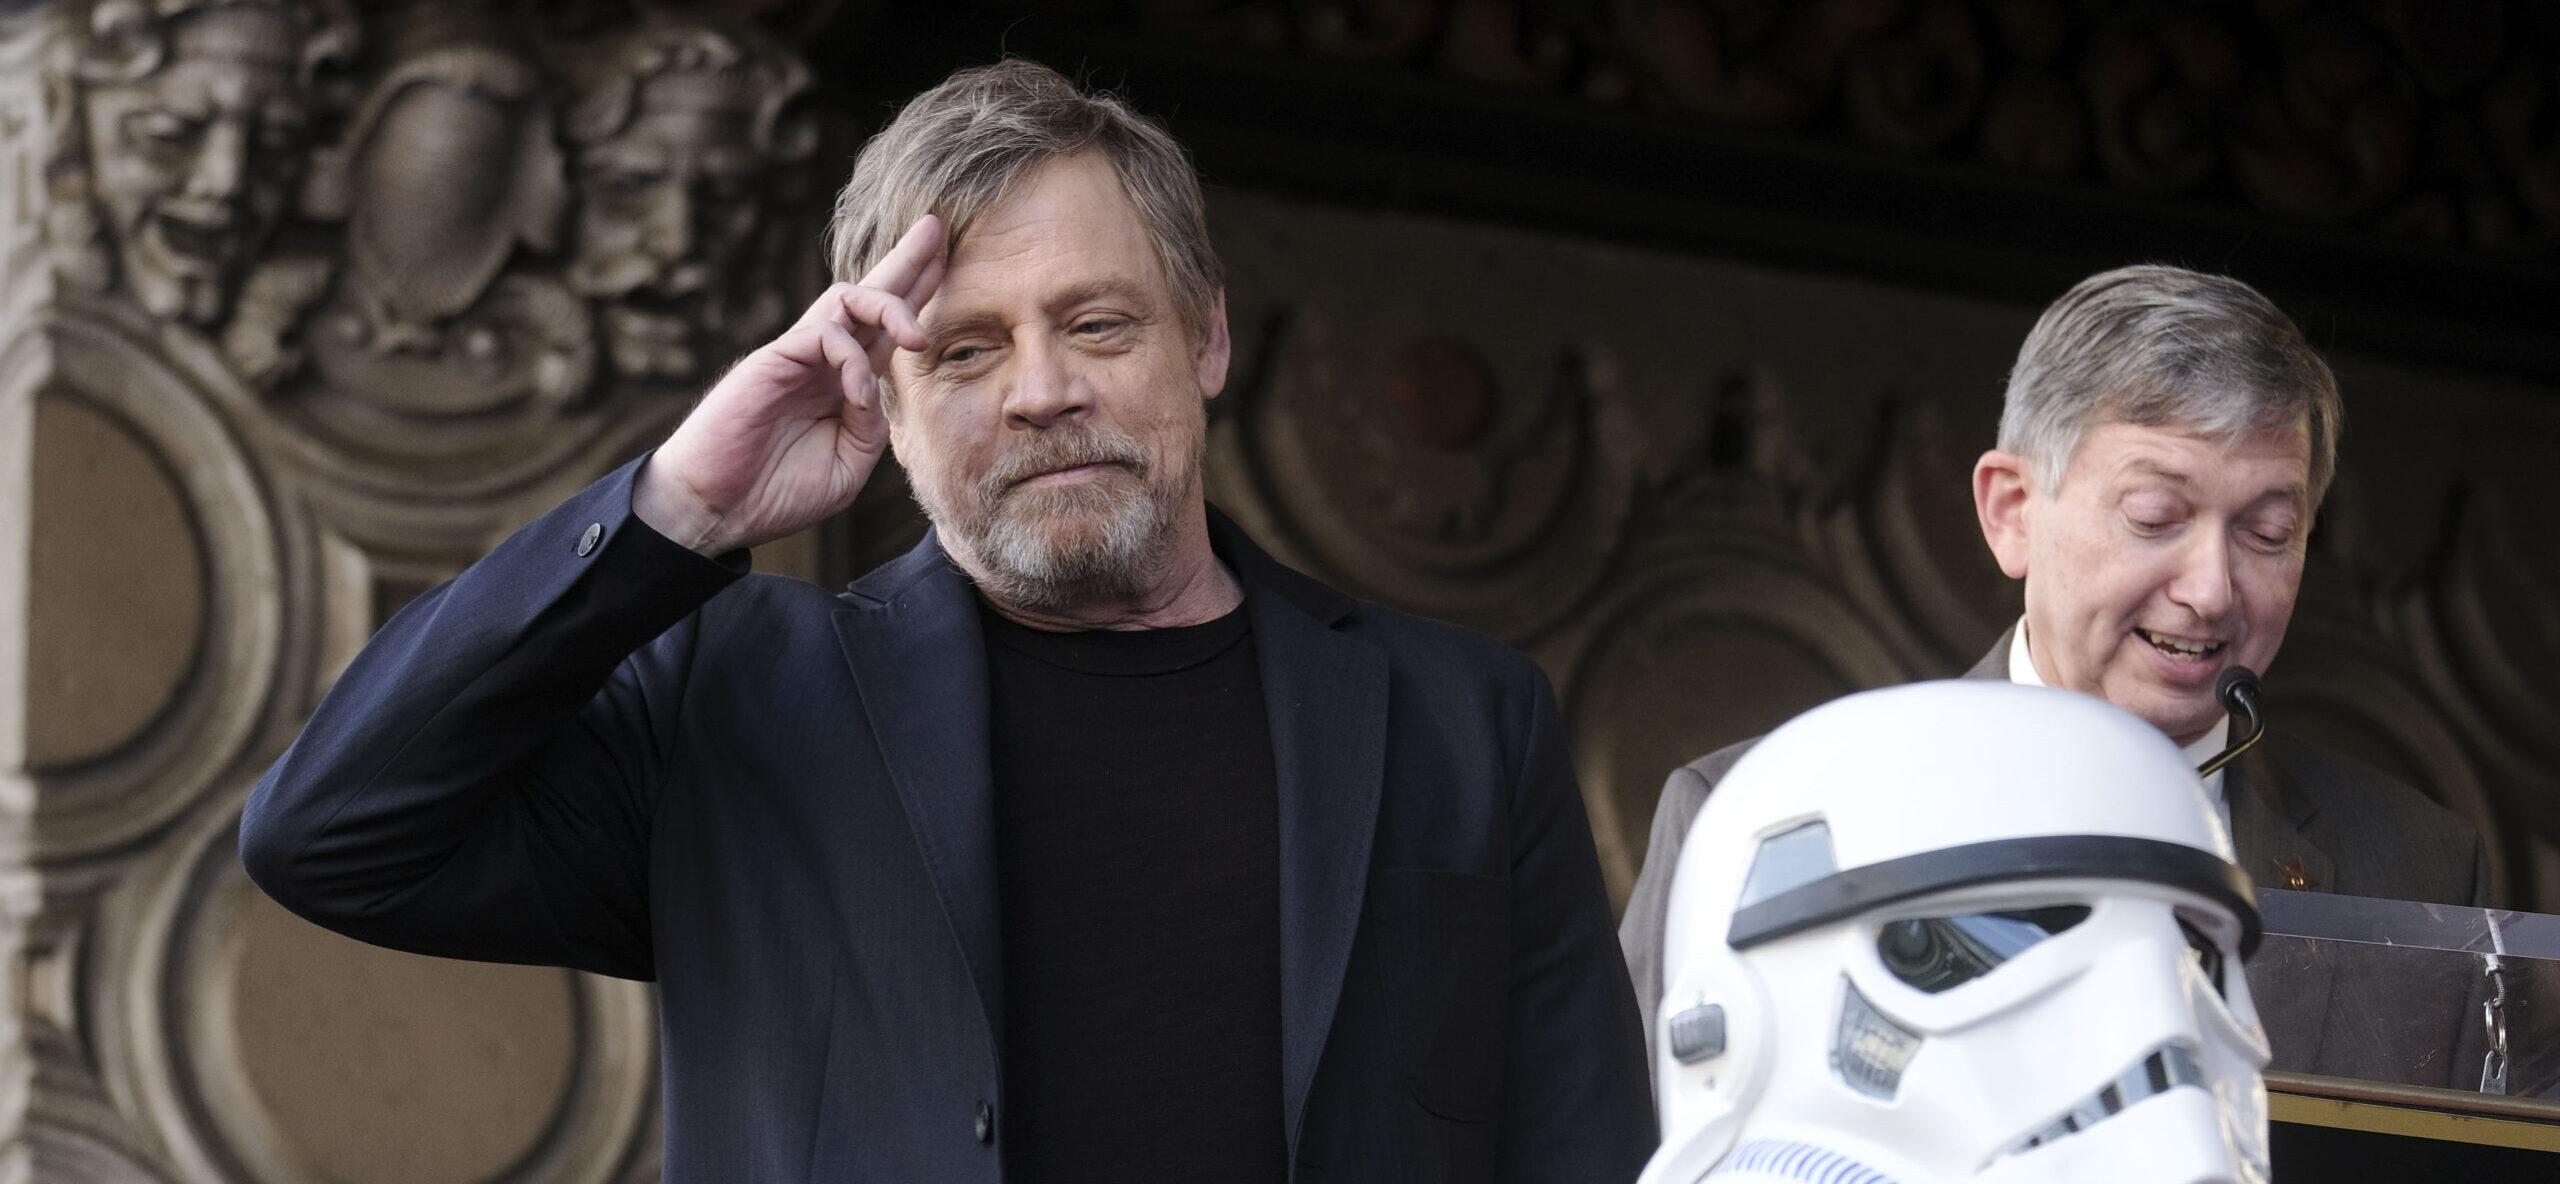 Mark Hamill Is Done With ‘Star Wars’ Character Luke Skywalker: ‘That’s Enough’